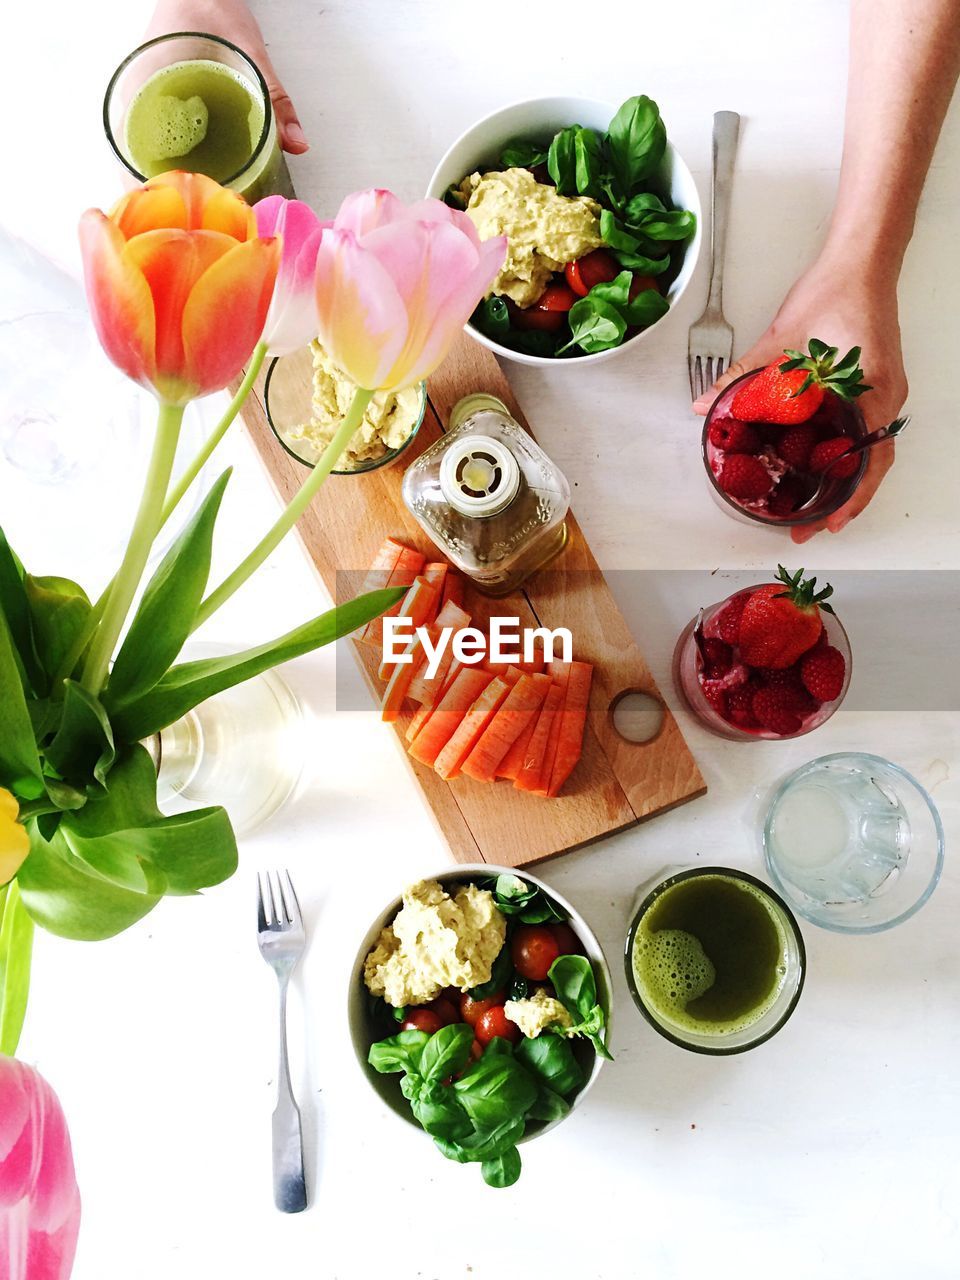 Cropped hands of person holding strawberries in glass by food and tulips at table